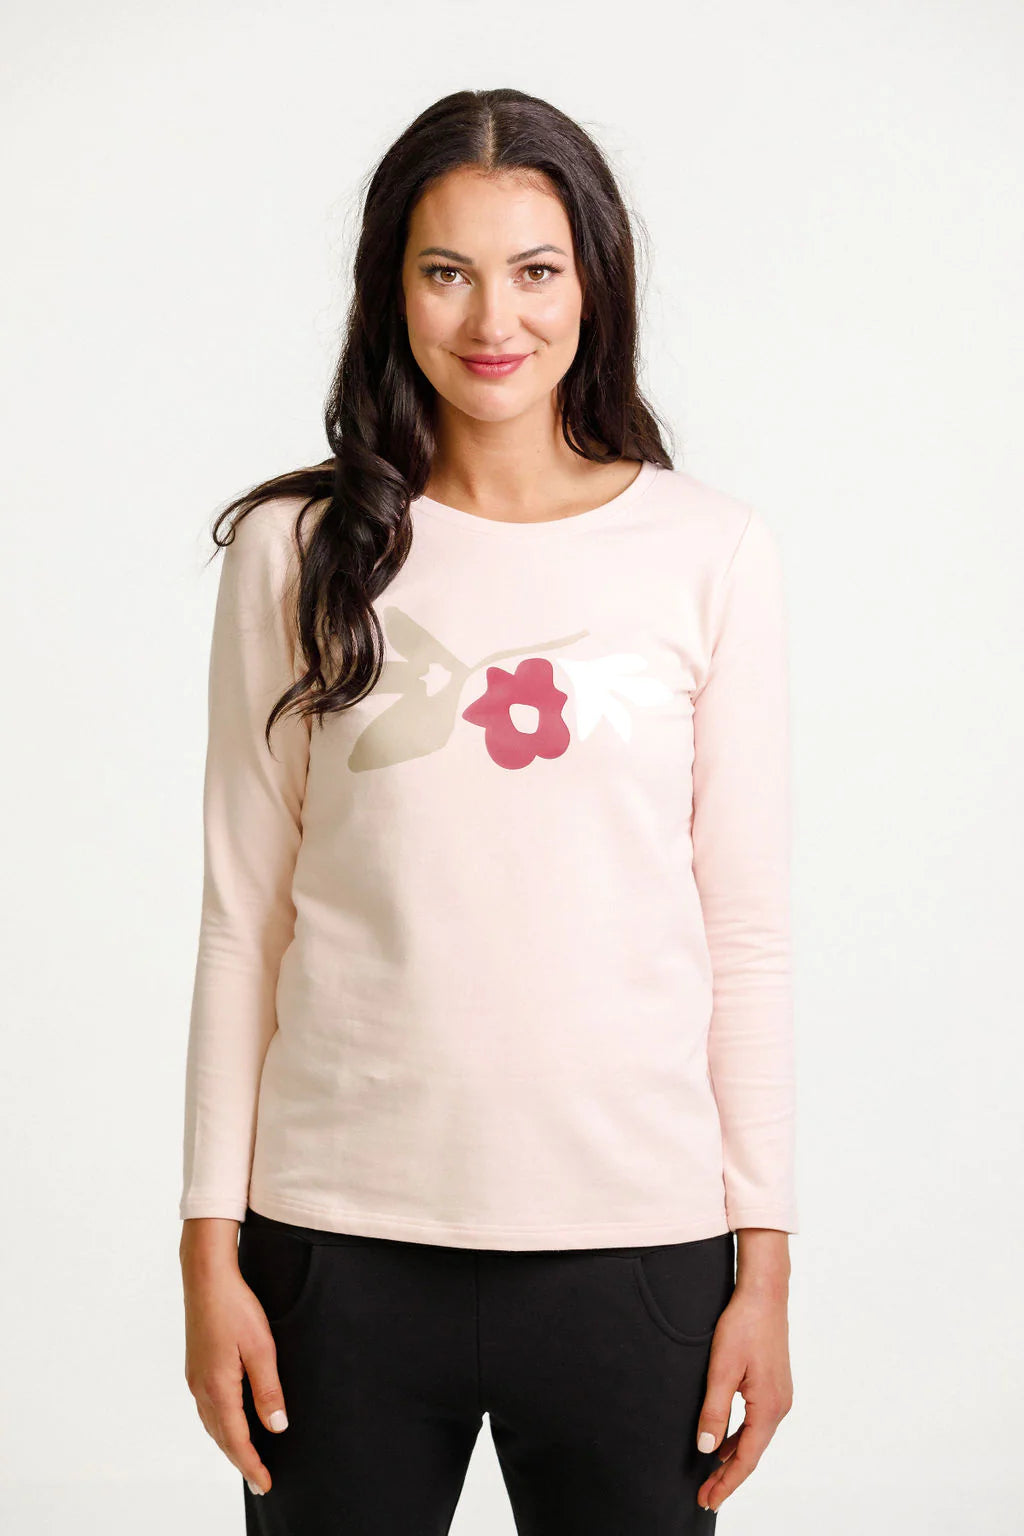 Homelee Taylor Tee Long Sleeve - Winter - Peach With Meta Floral